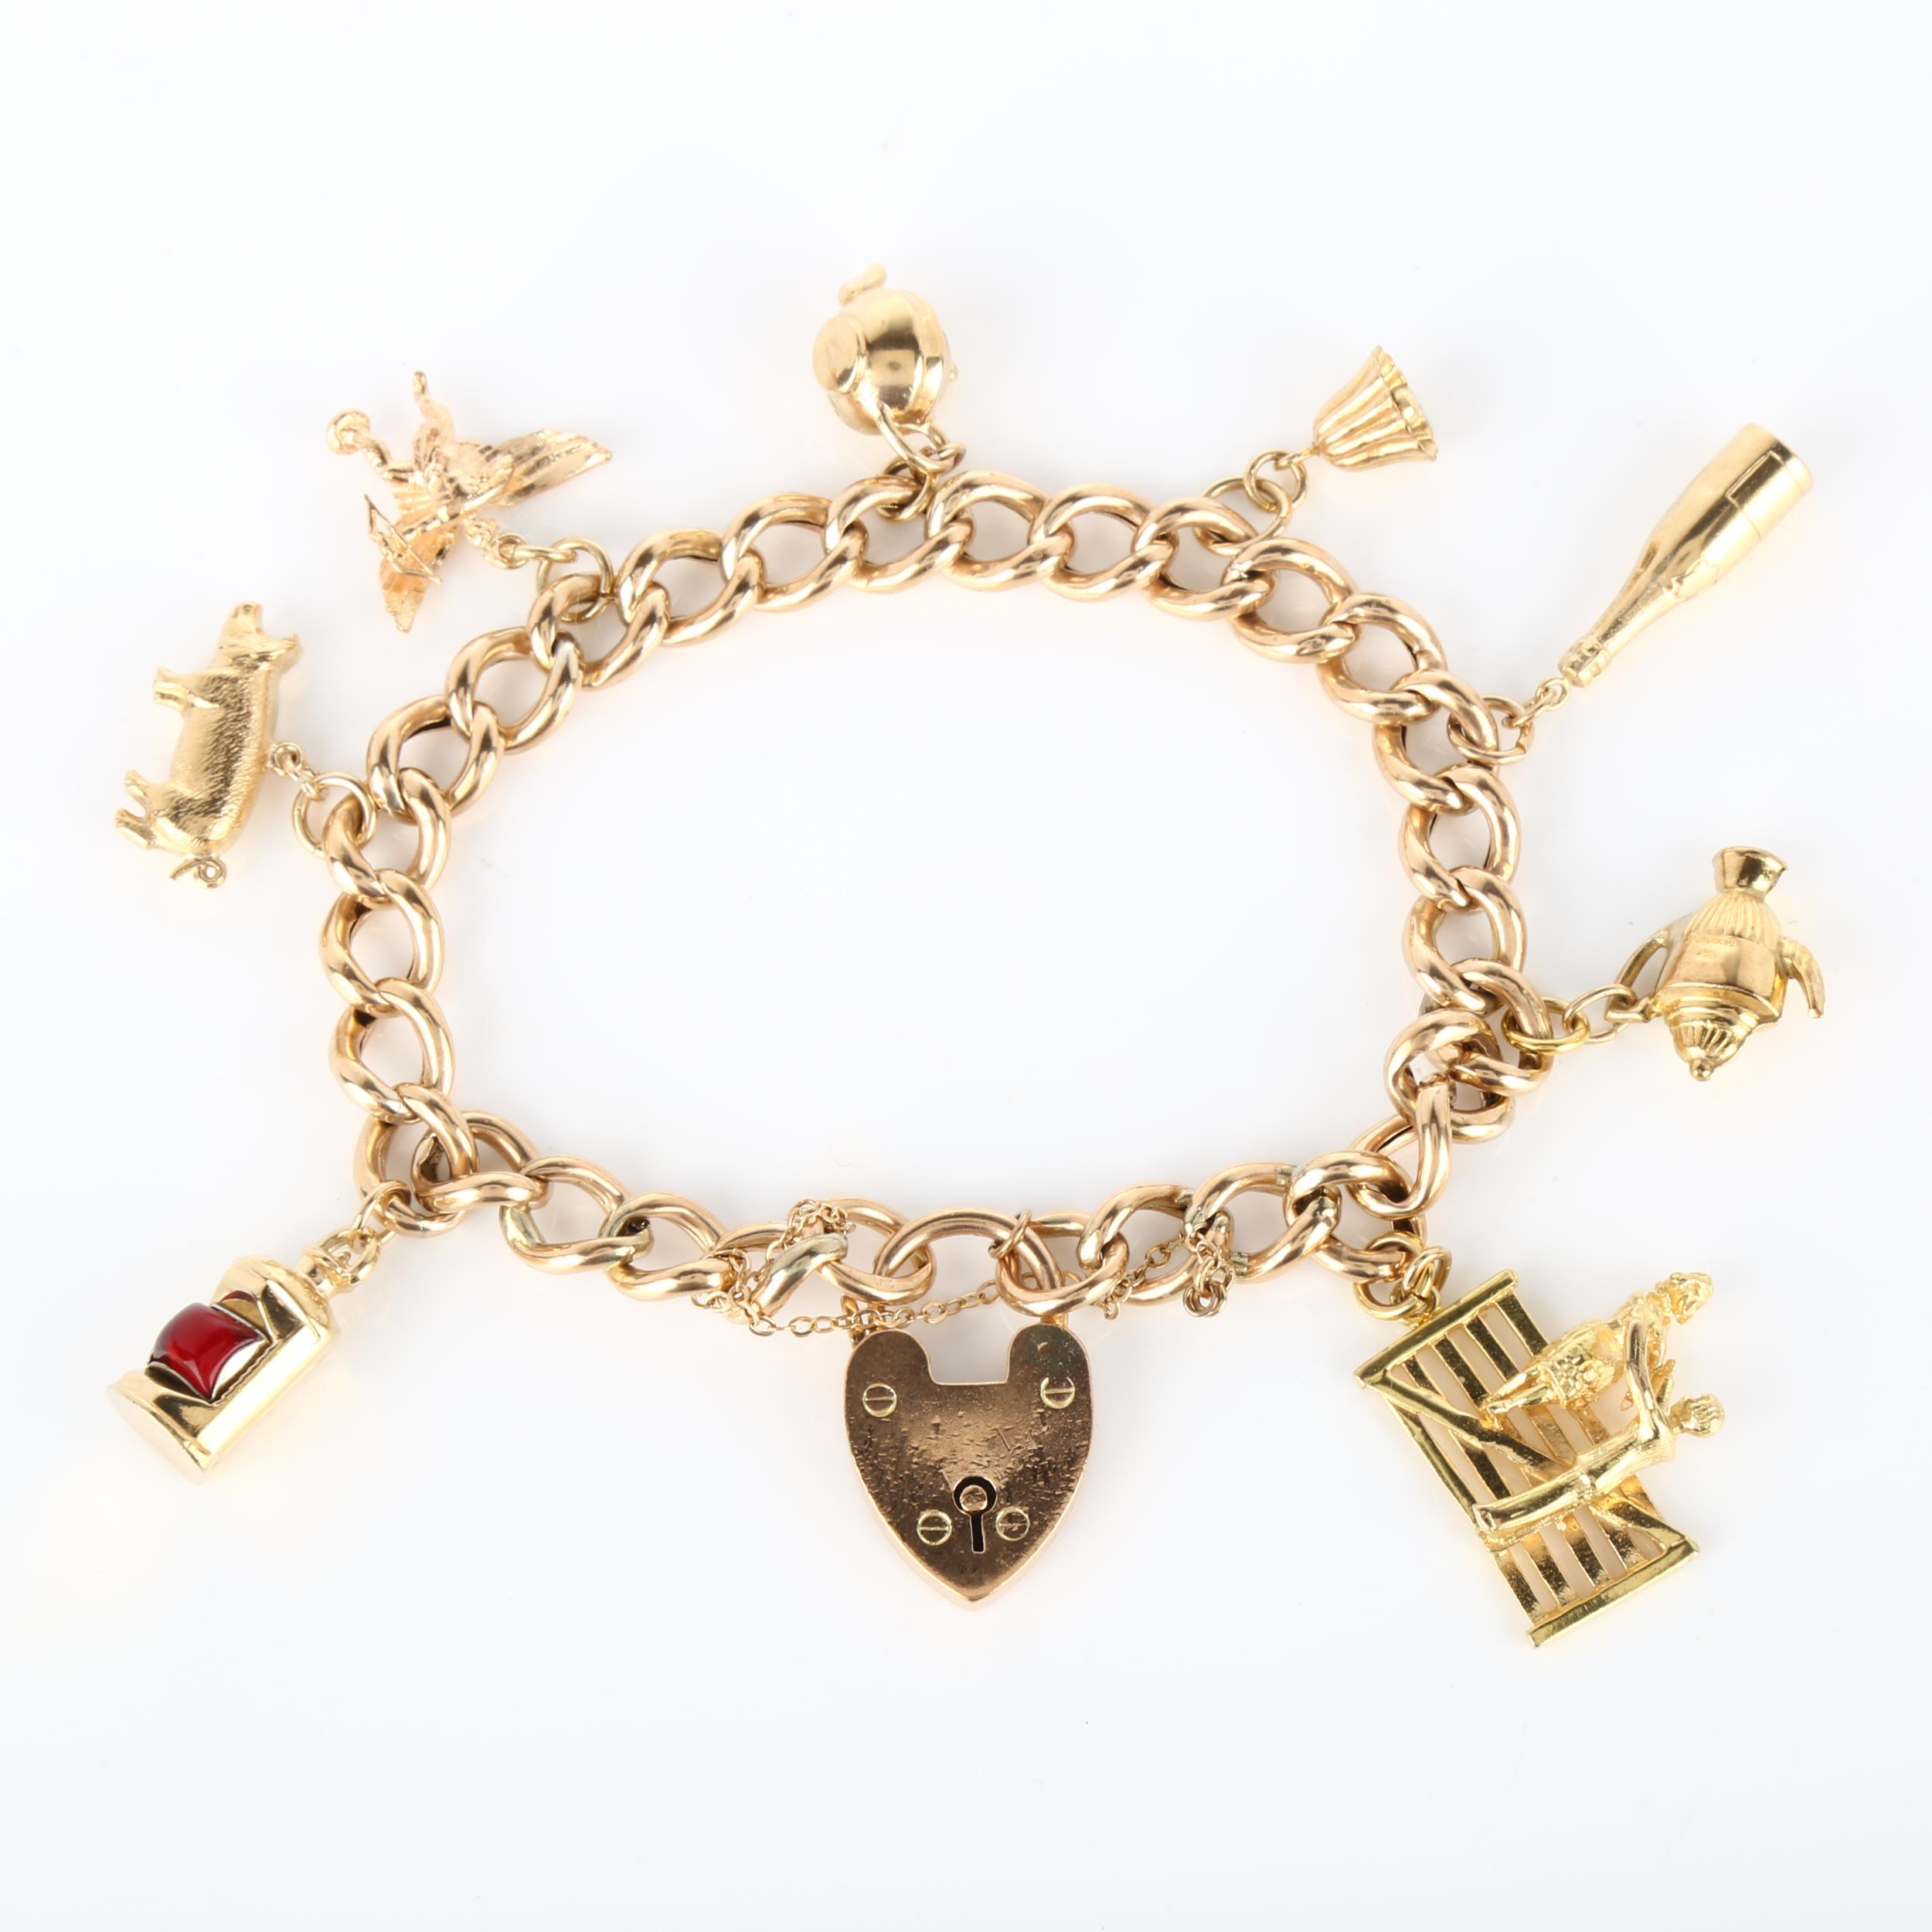 A mid-20th century 9ct gold hollow curb link charm bracelet, with 8 gold charms and heart padlock